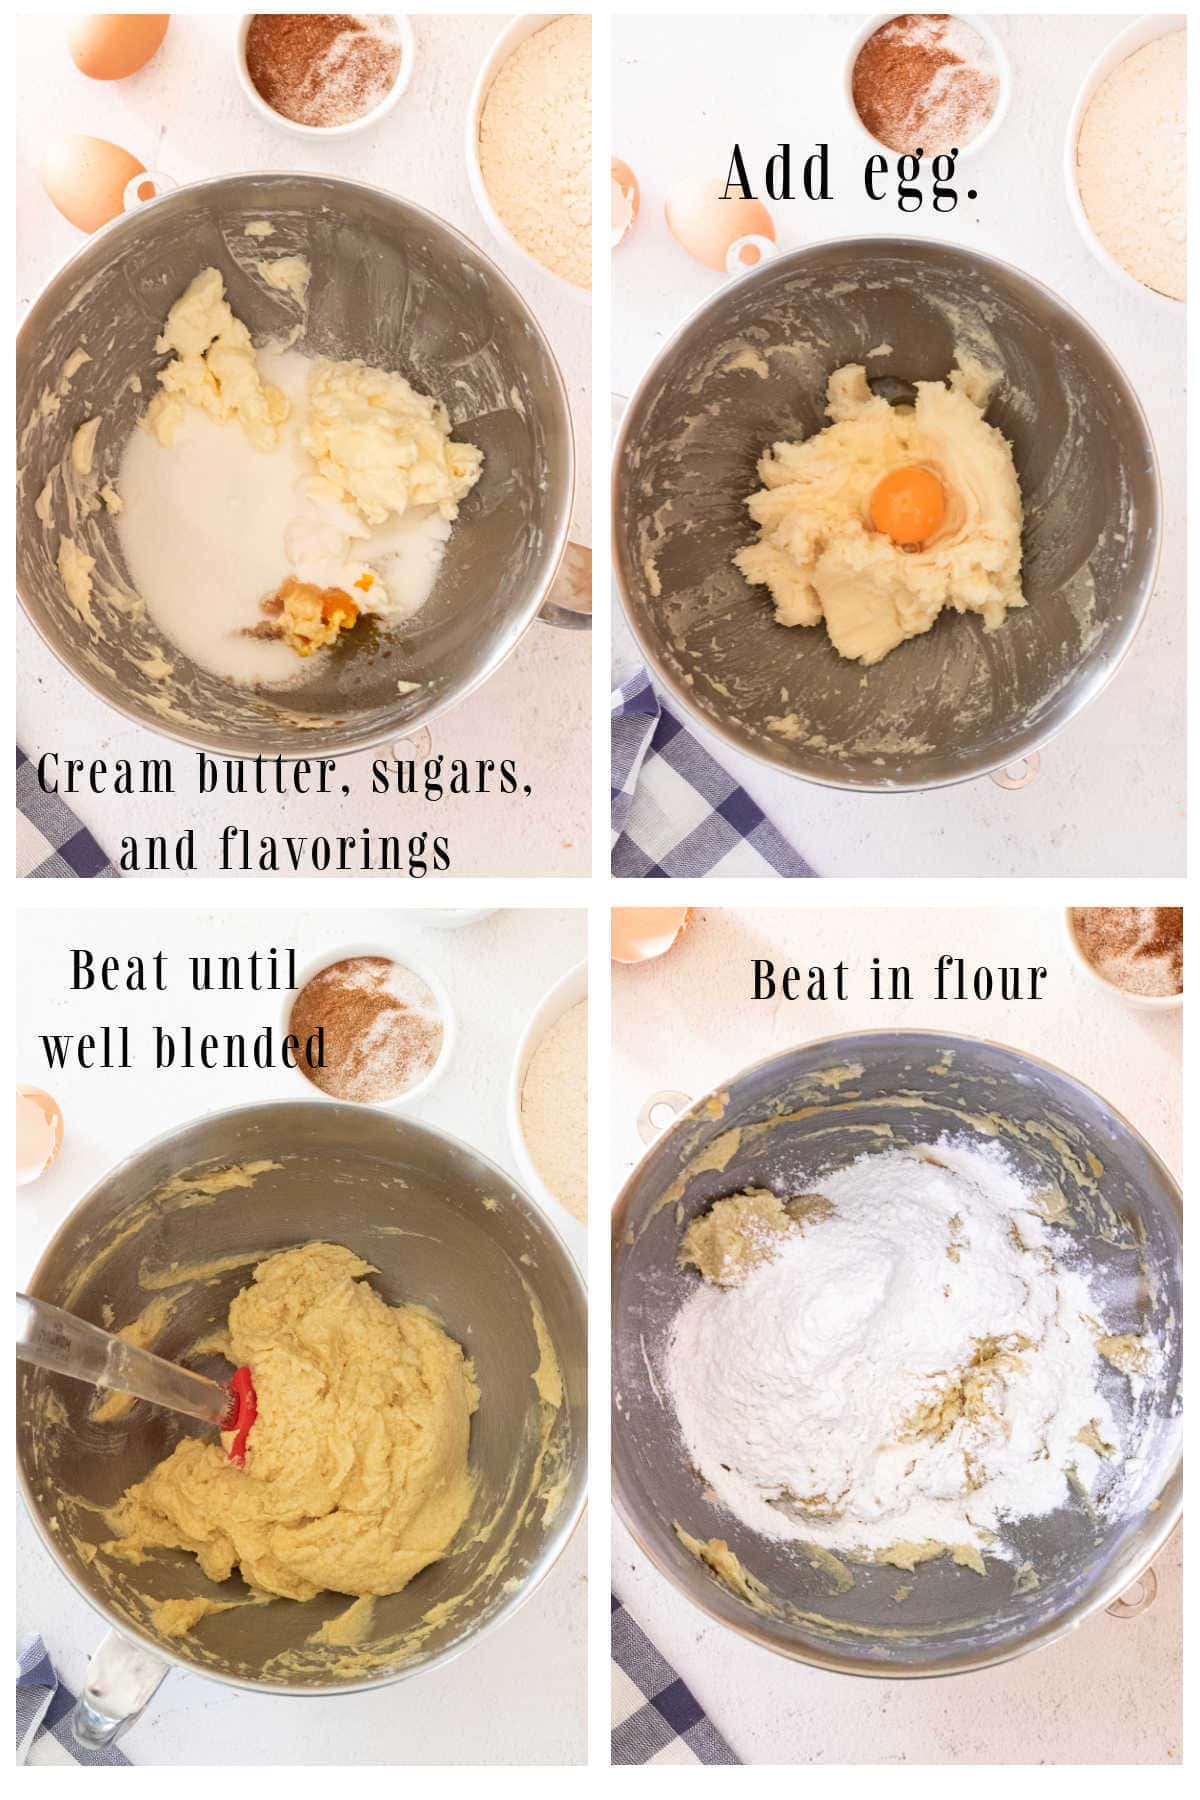 Step by step images of making snickerdoodle dough.